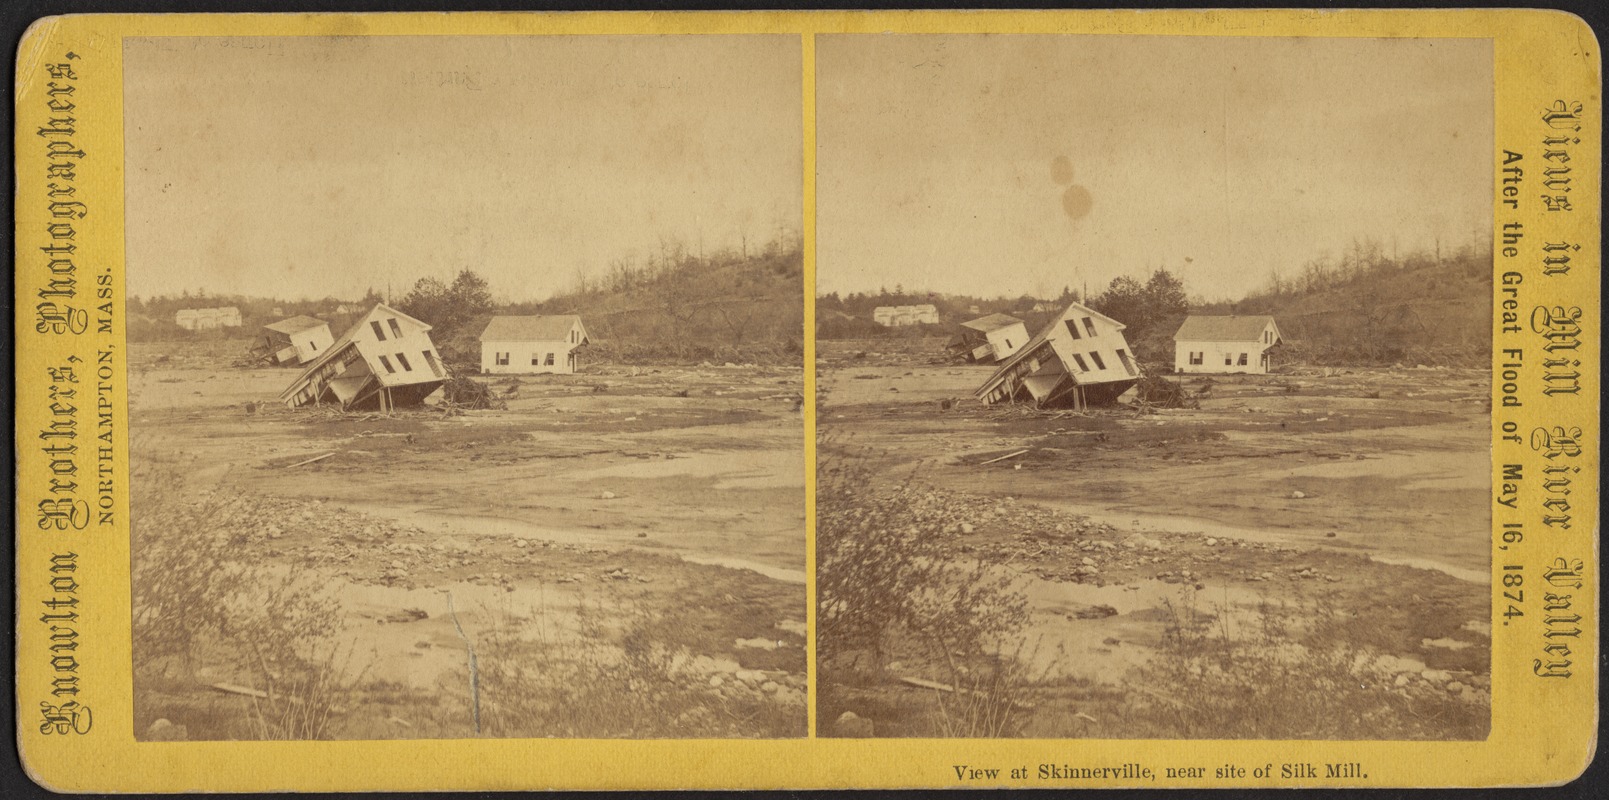 View showing the three houses and the flats, near site of Silk Mill--Skinnerville